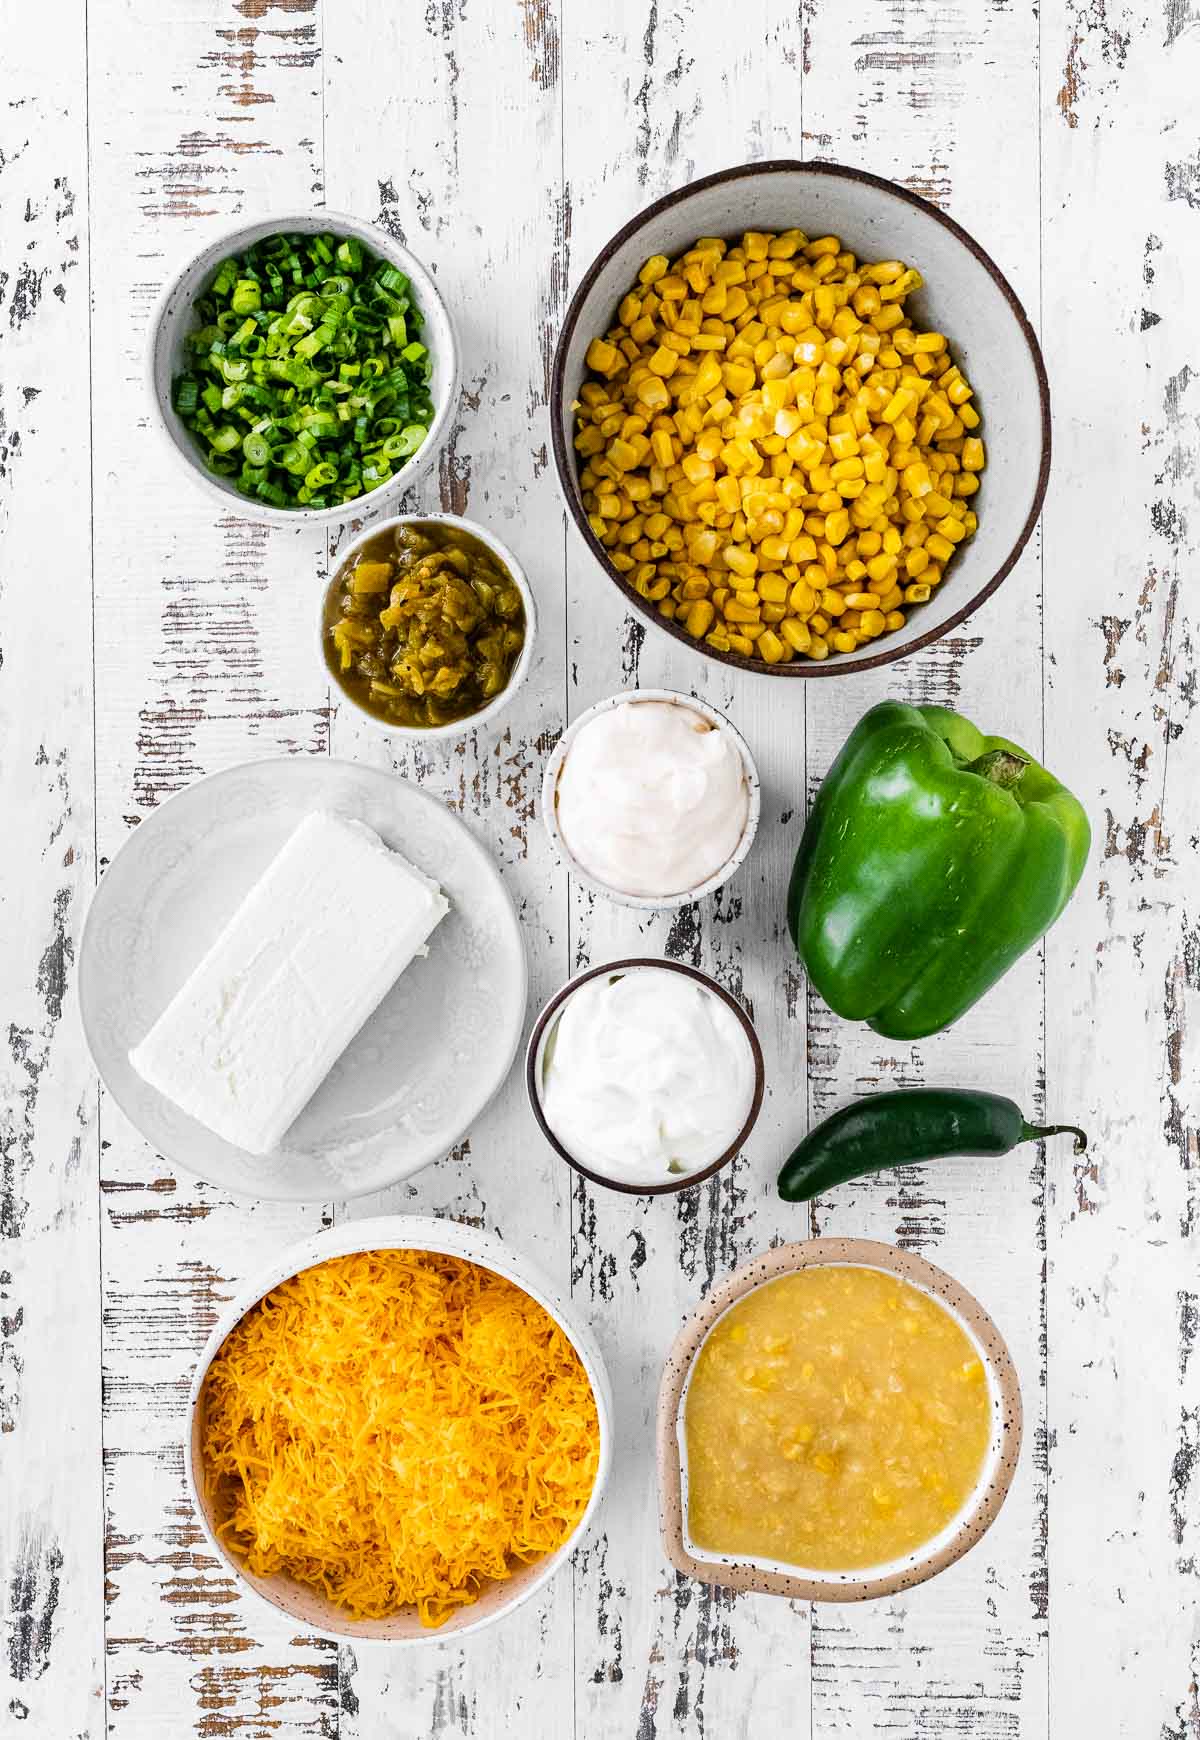 Corn Dip ingredients spread out on counter and in separate bowls